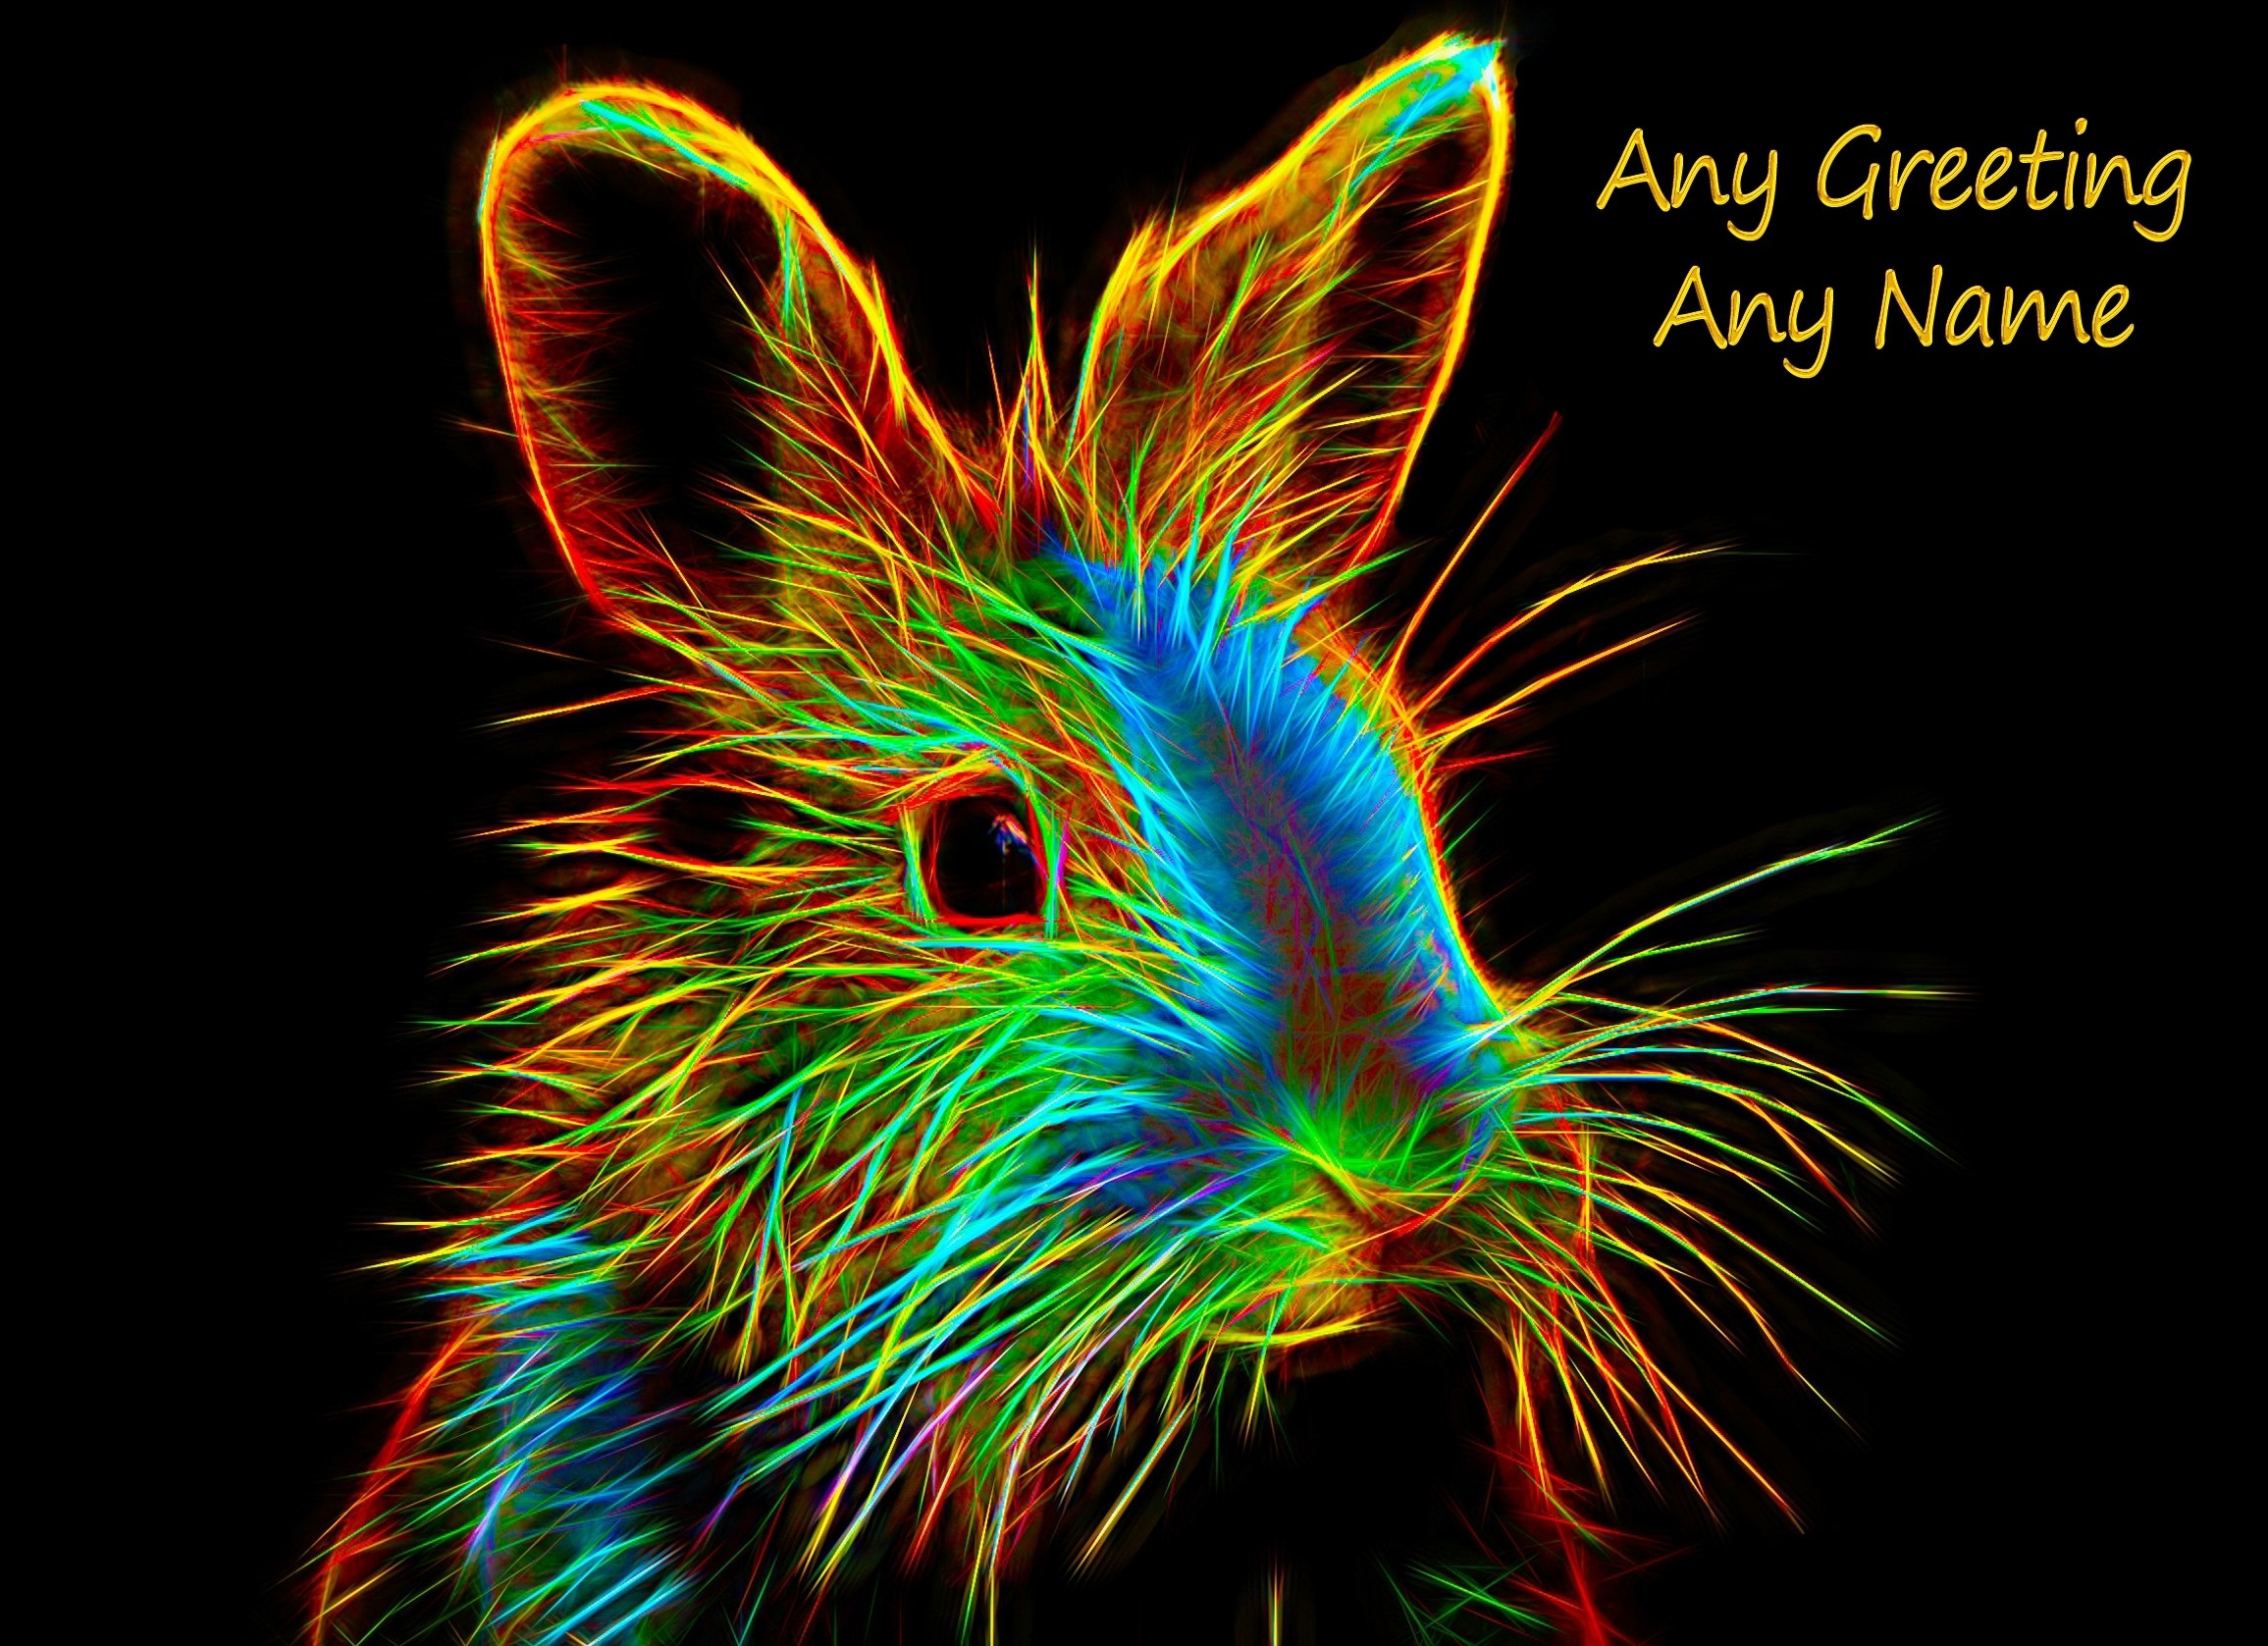 Personalised Rabbit Neon Art Greeting Card (Birthday, Christmas, Any Occasion)